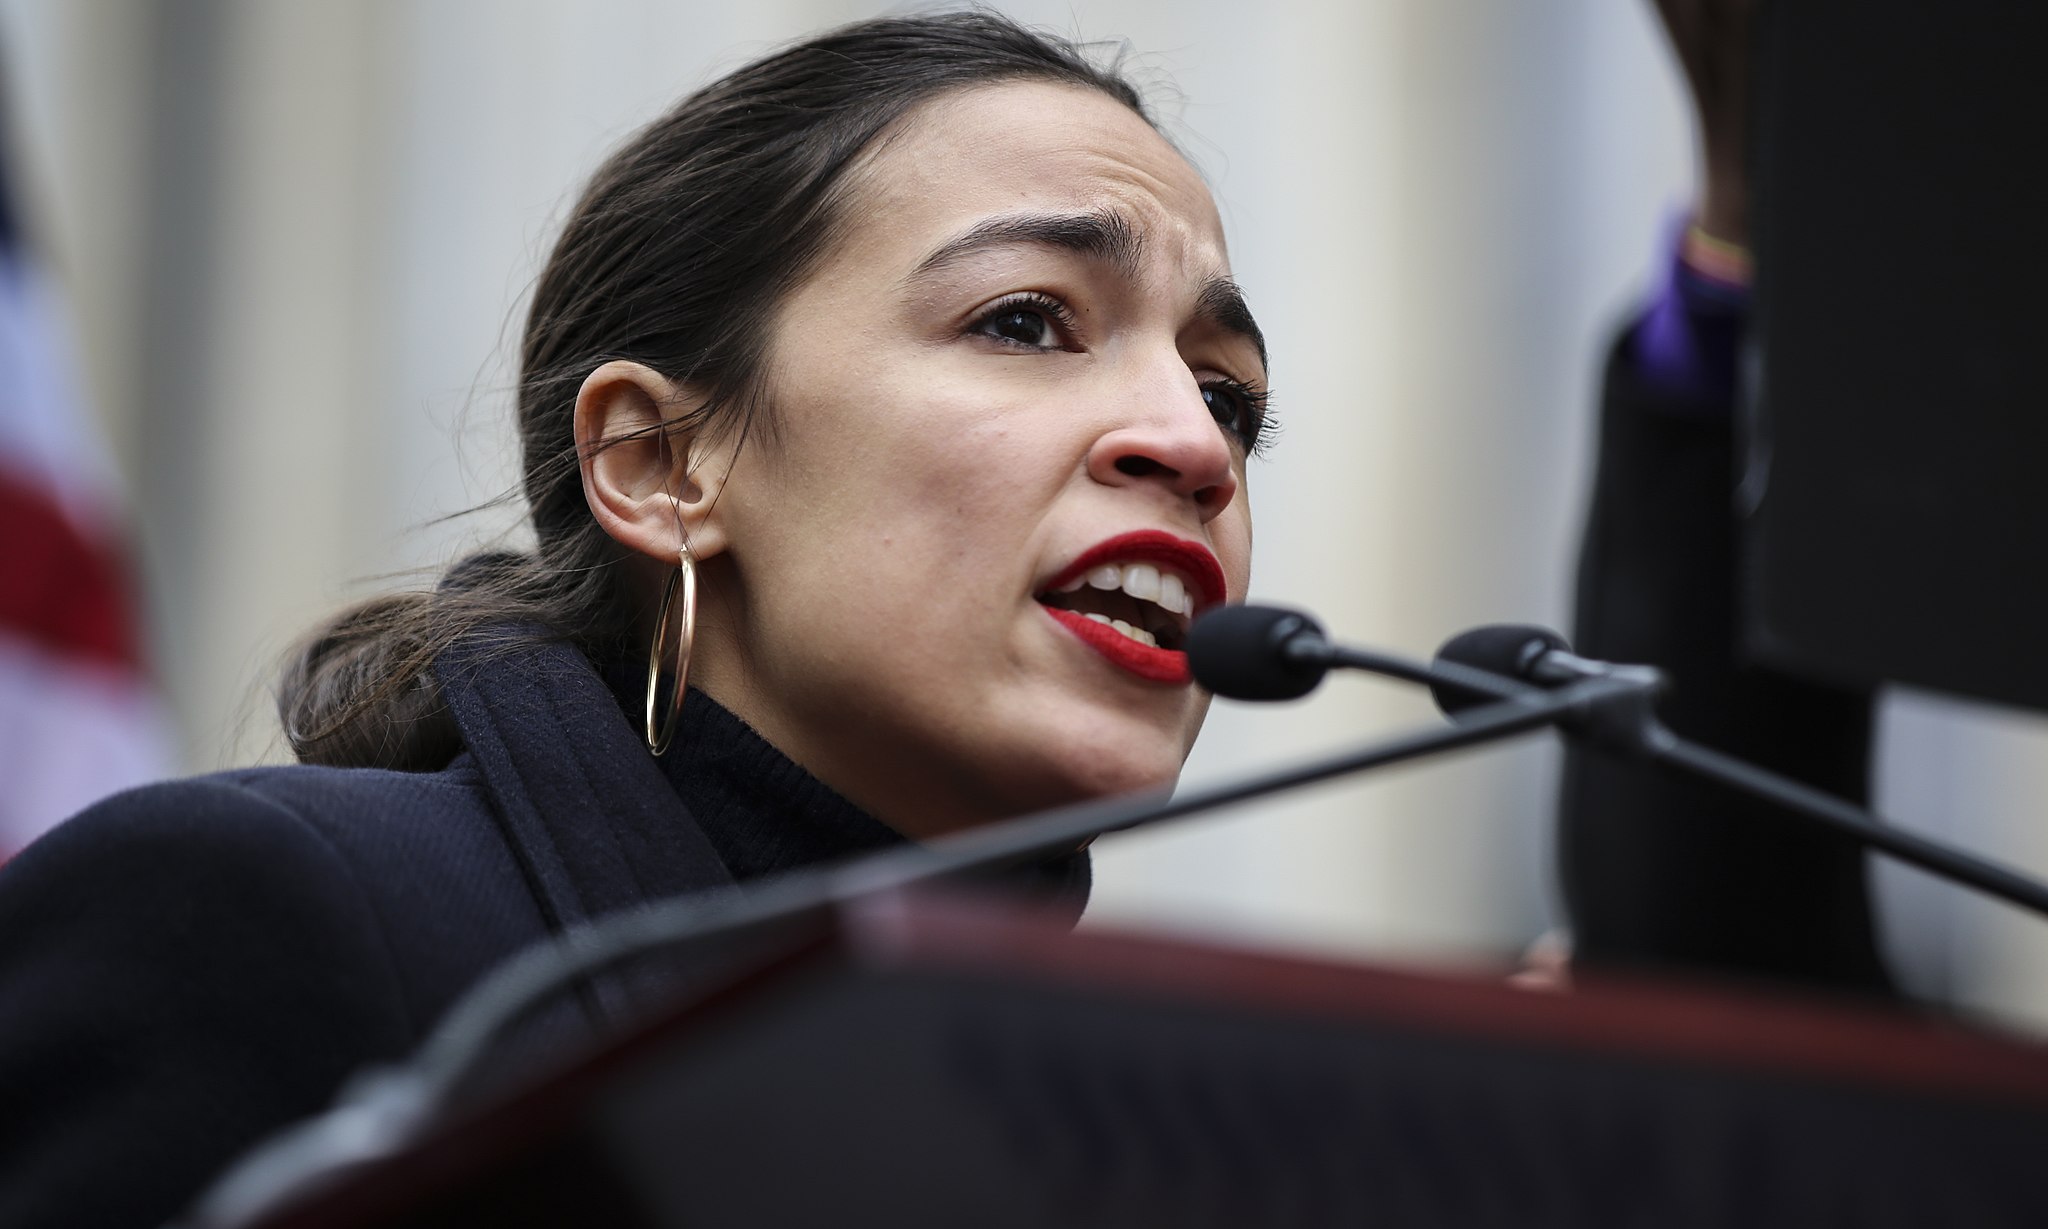 Should Ocasio-Cortez Be Voted Out Of Congress?